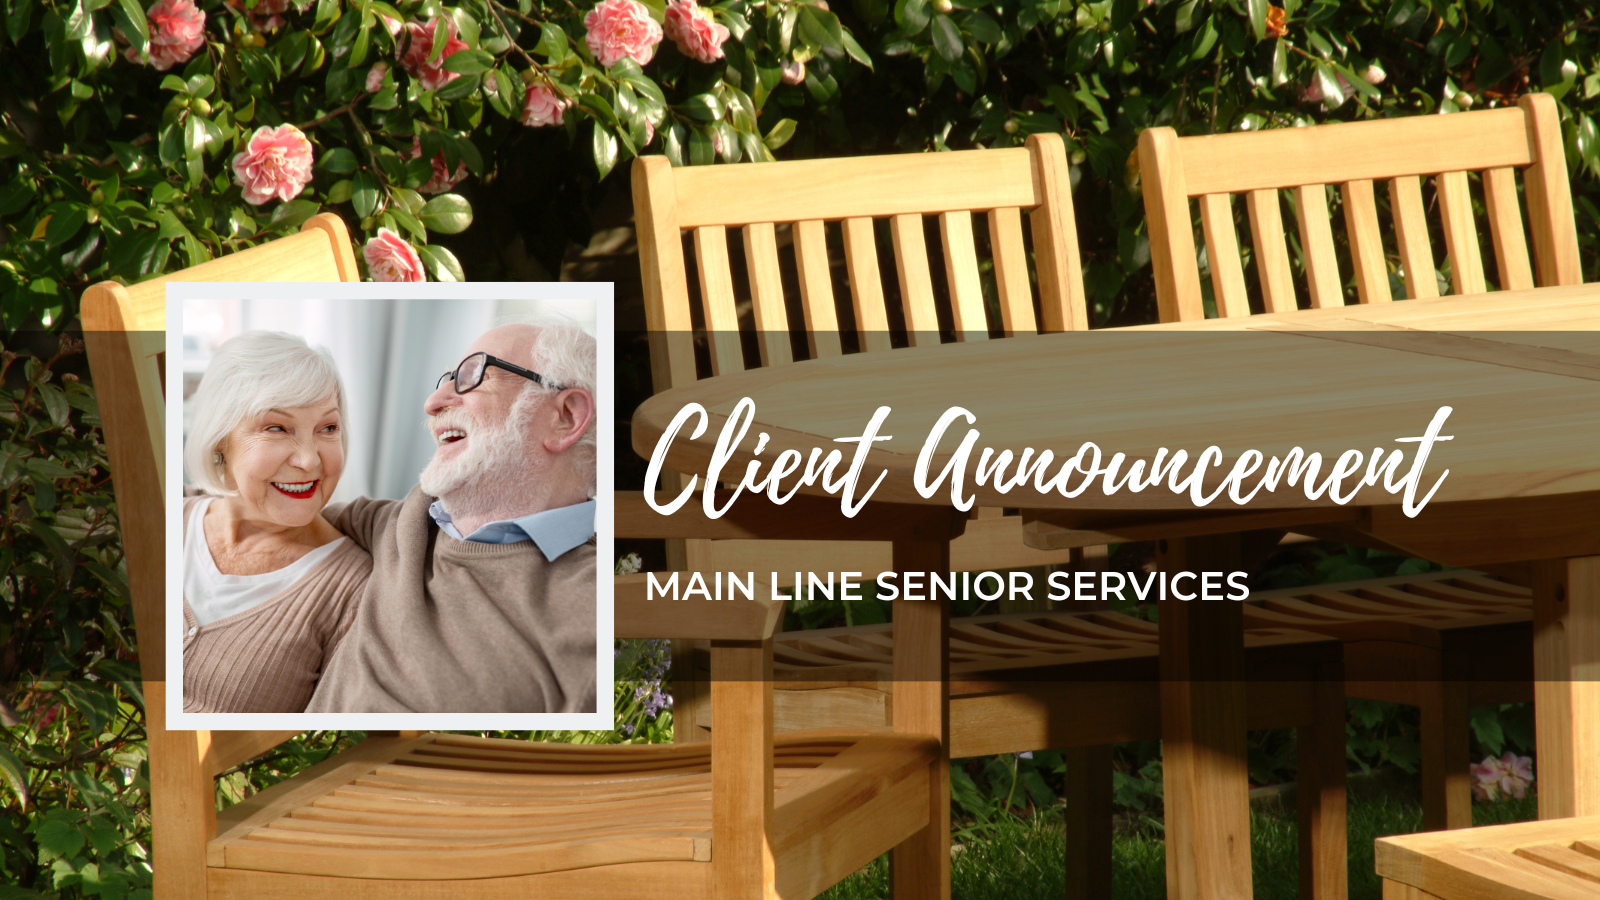 Welcome Main Line Senior Services